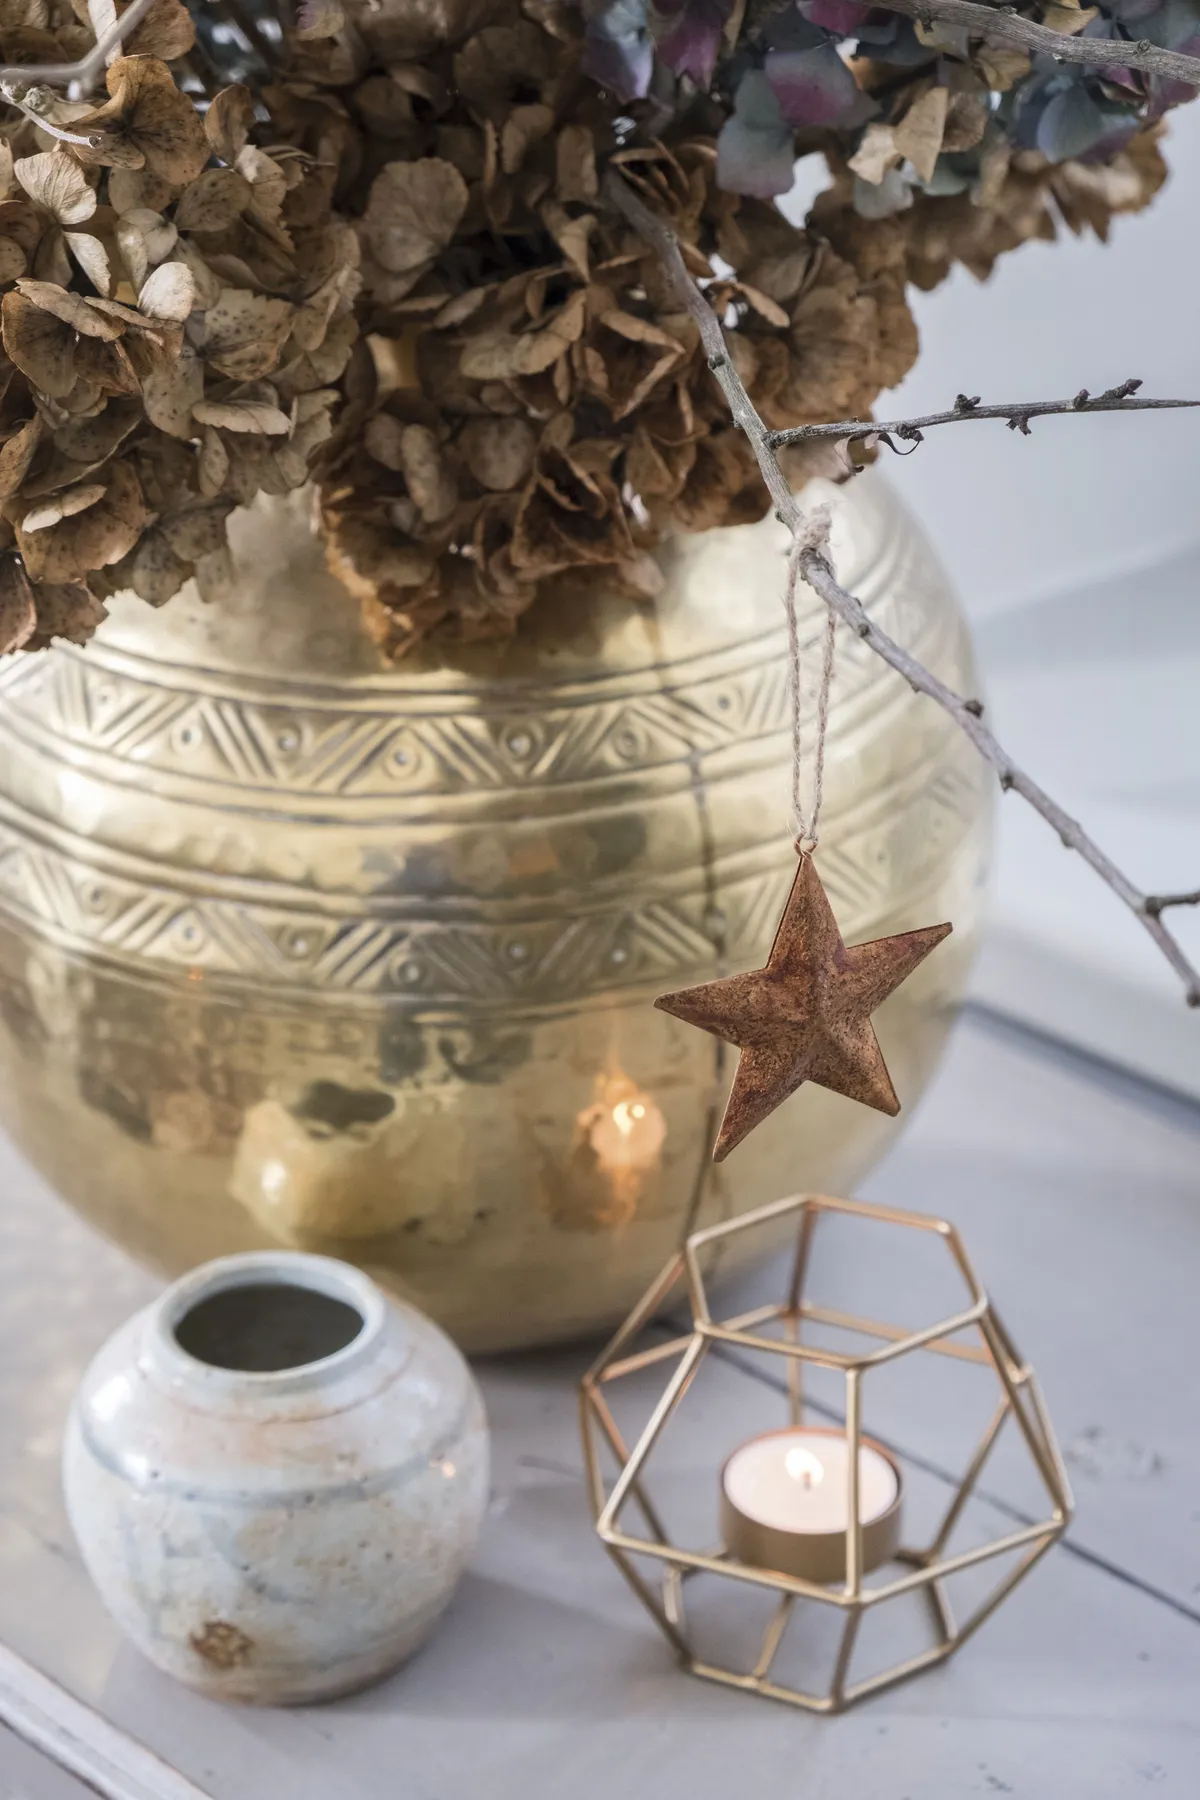 ‘Dried hydrangea heads look festive in a brass vase, and combined with a metallic wire tealight and earthenware pot, they create the rustic feel I love,’ says Kay